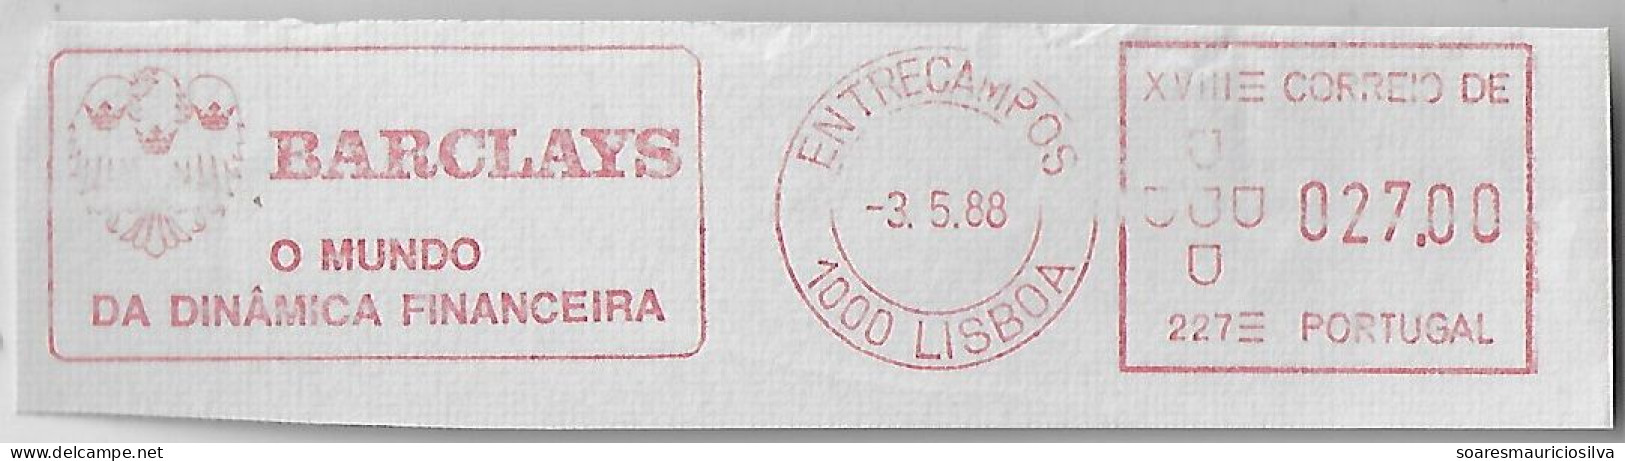 Portugal 1988 Fragment Meter Stamp Hasler Mailmaster Slogan Barclays The World Of Financial Dynamics Lisbon Entrecampos - Covers & Documents